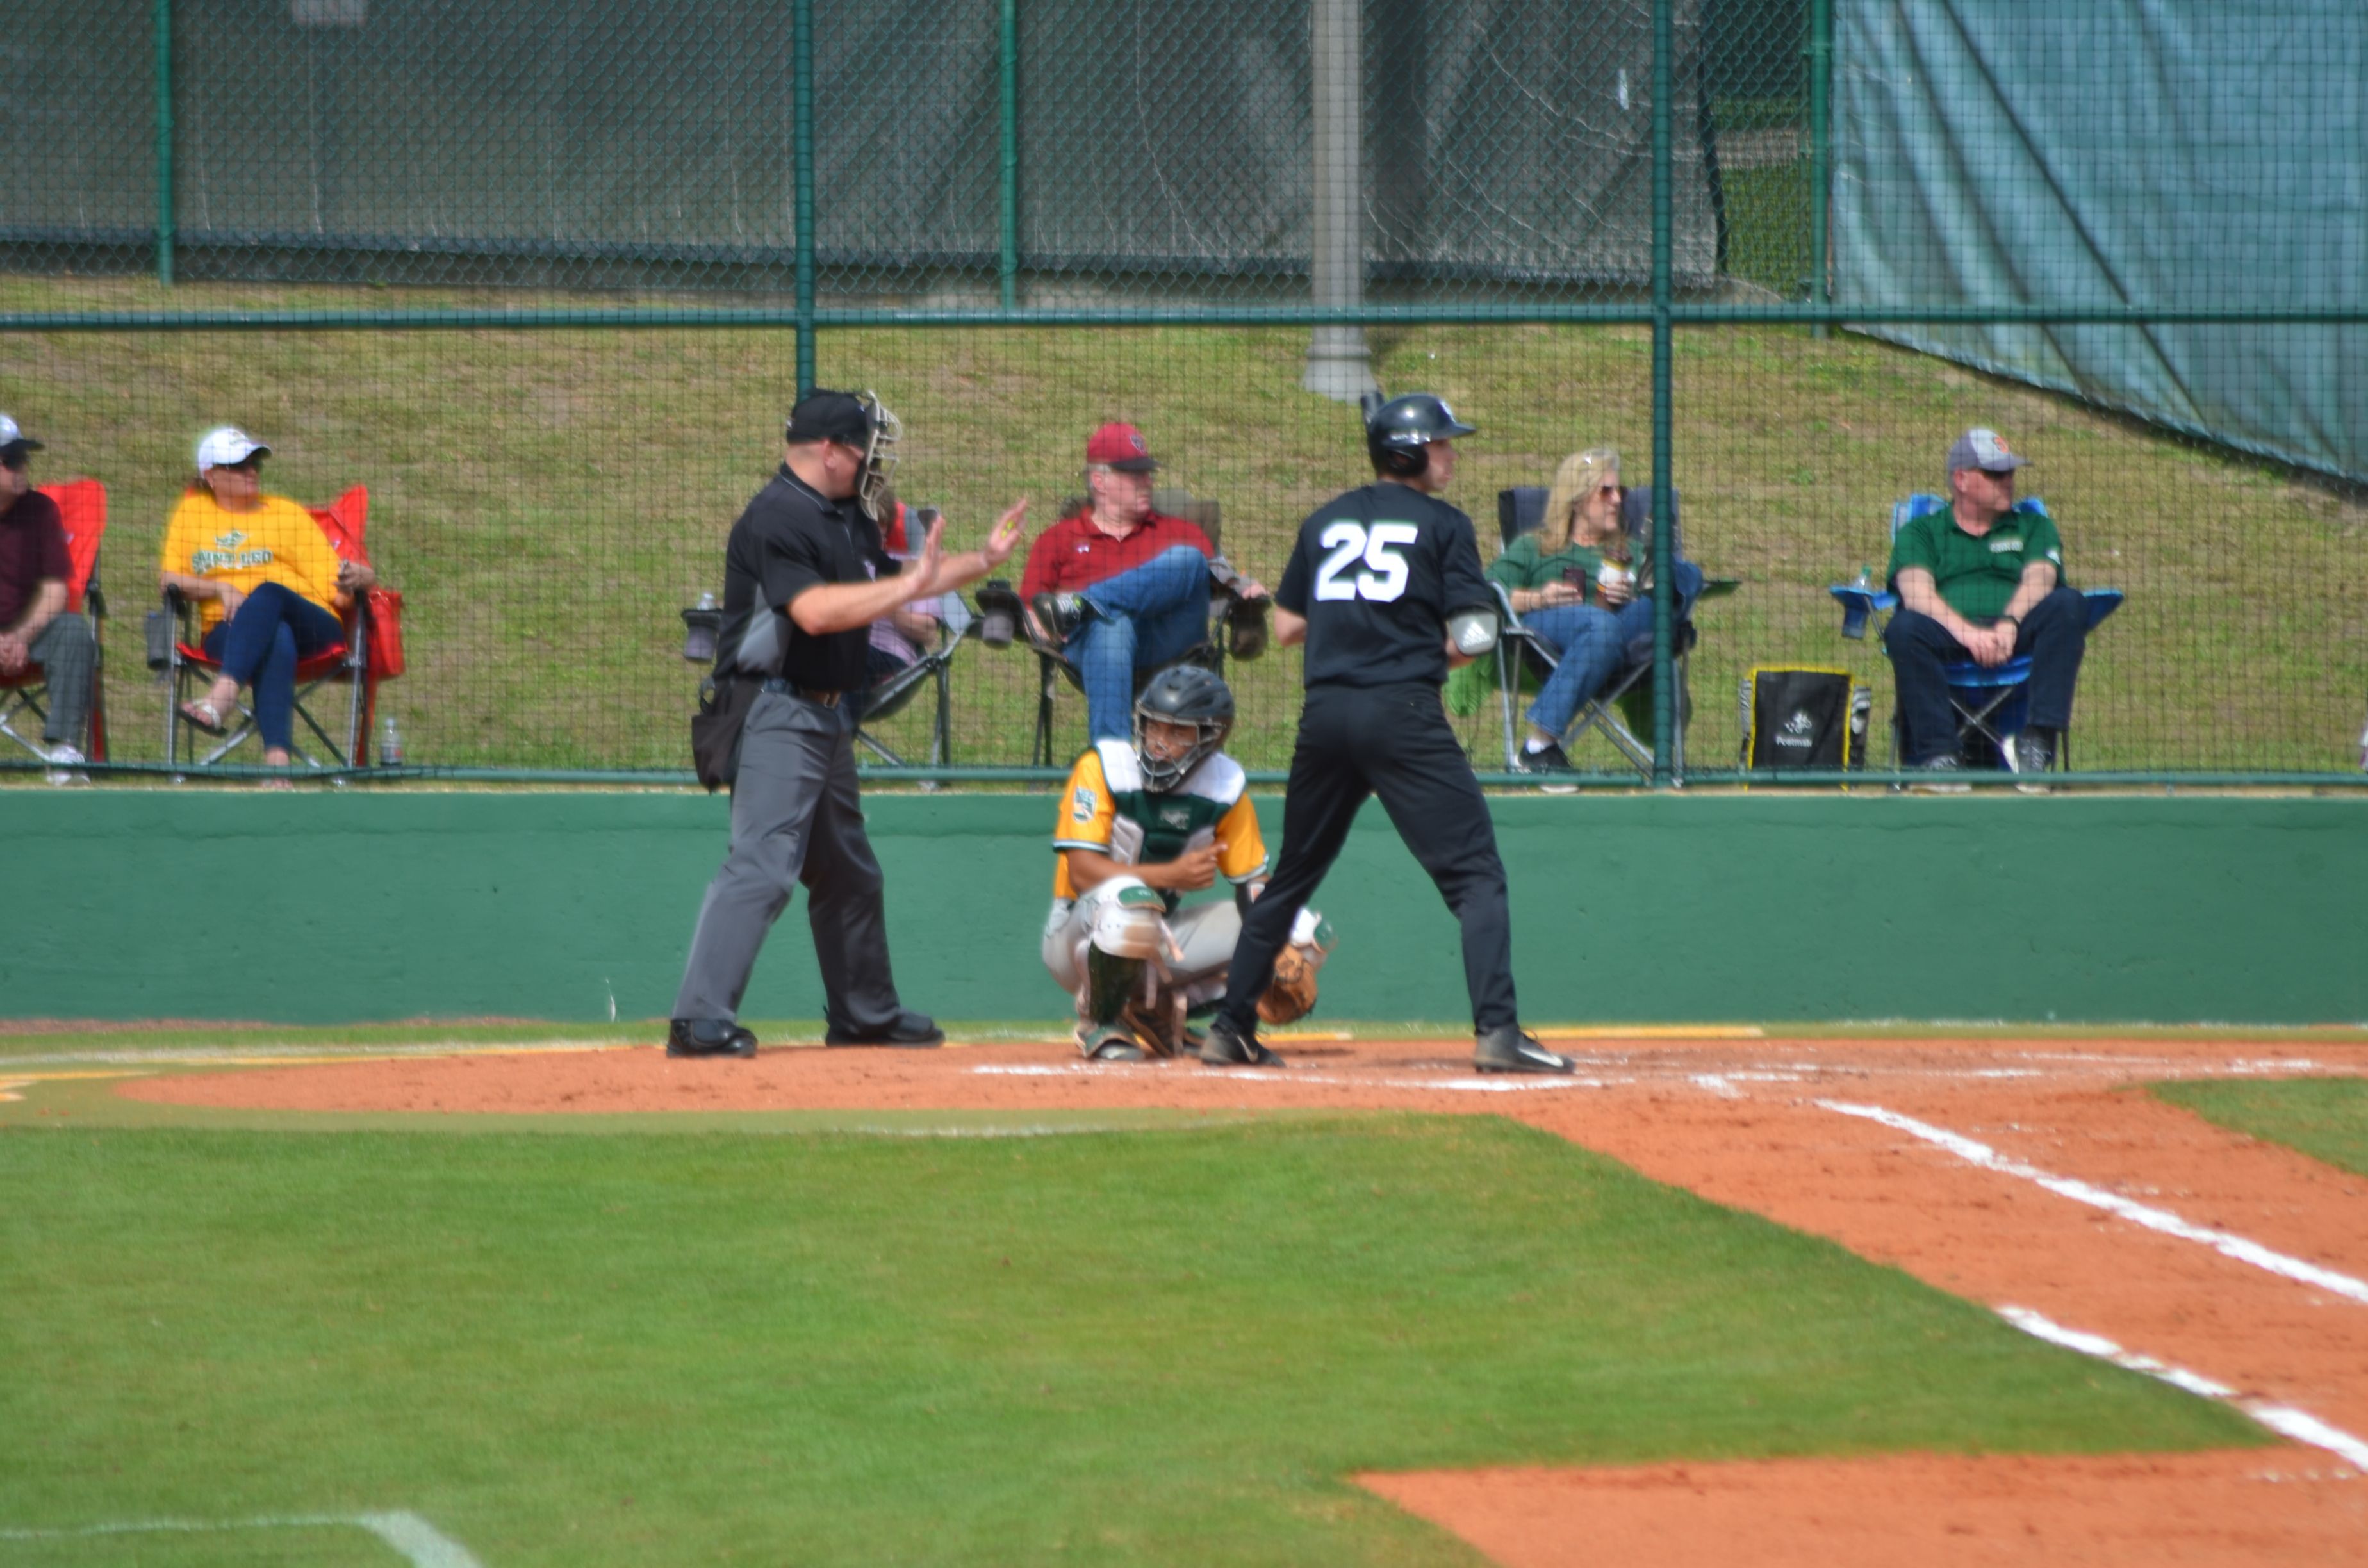 The Saint Leo catcher looks into the dugout to get the pitch call.